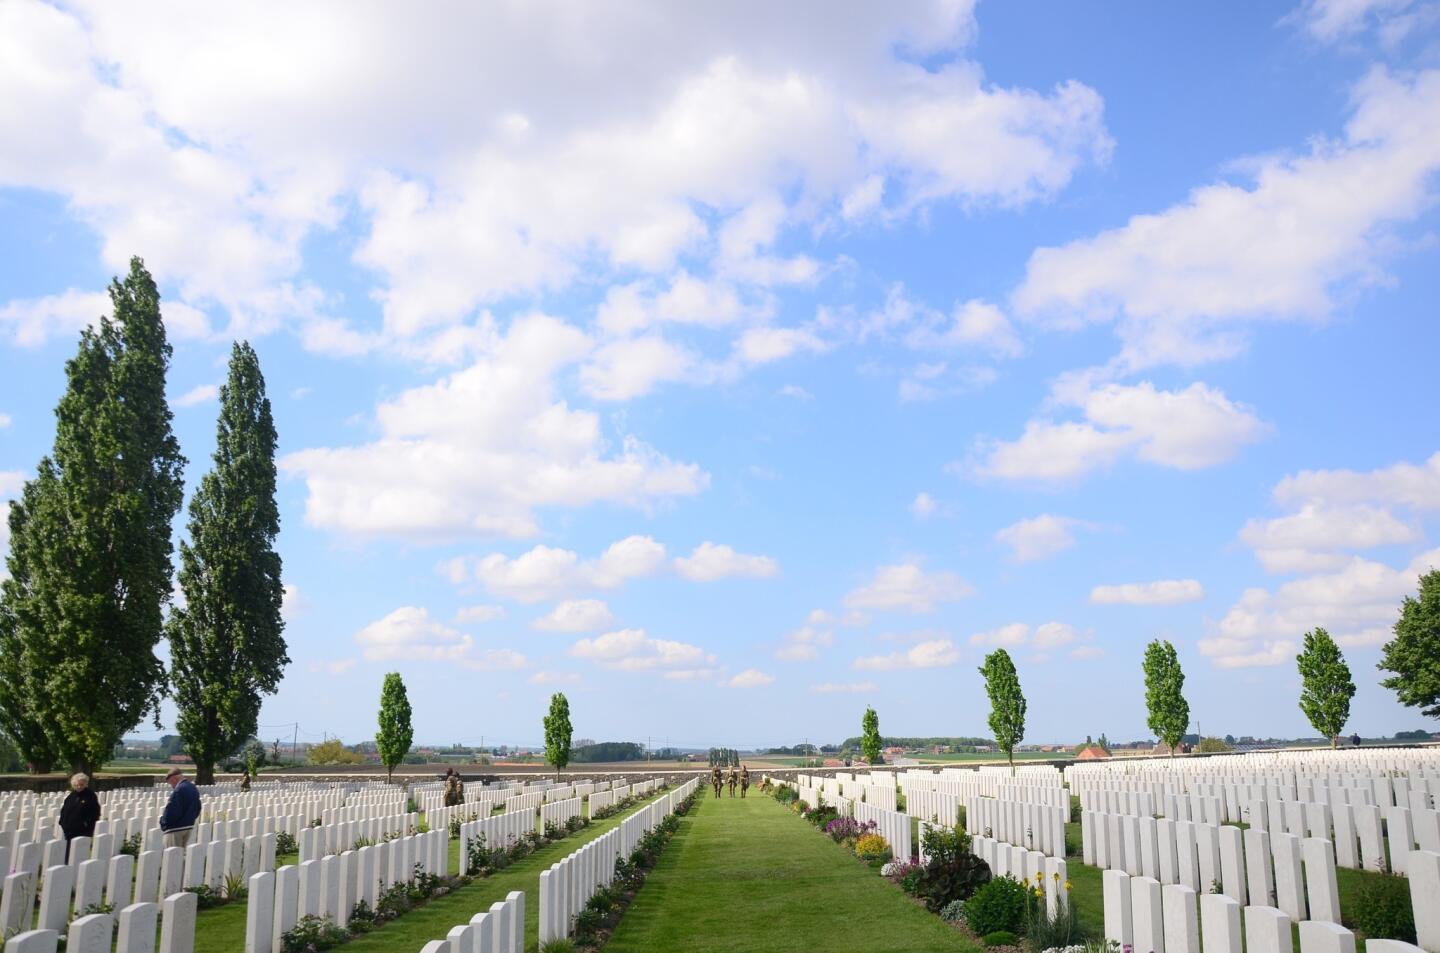 Tyne Cot Commonwealth War Graves Cemetery